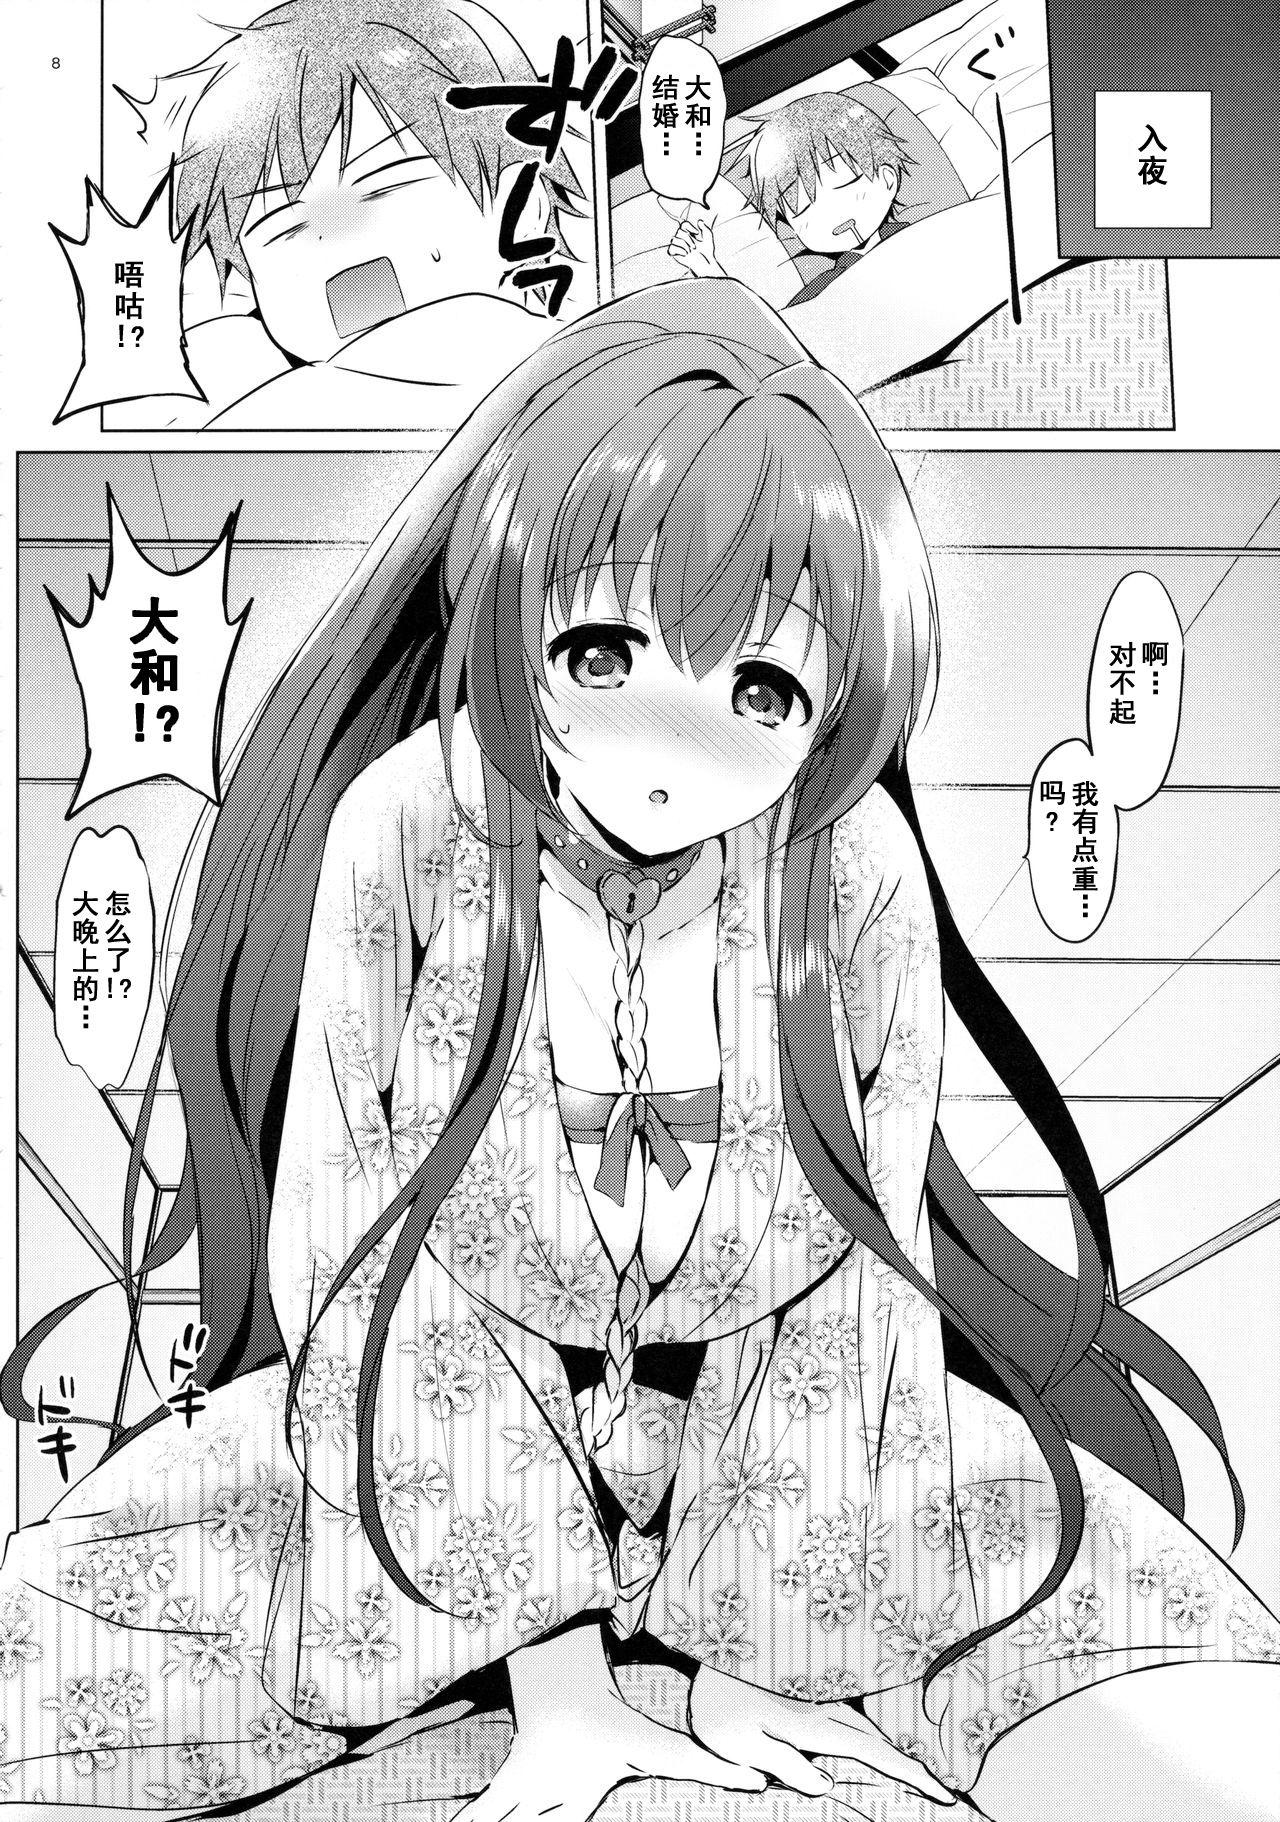 Exhibitionist Yamato Control - Kantai collection Teen Blowjob - Page 8